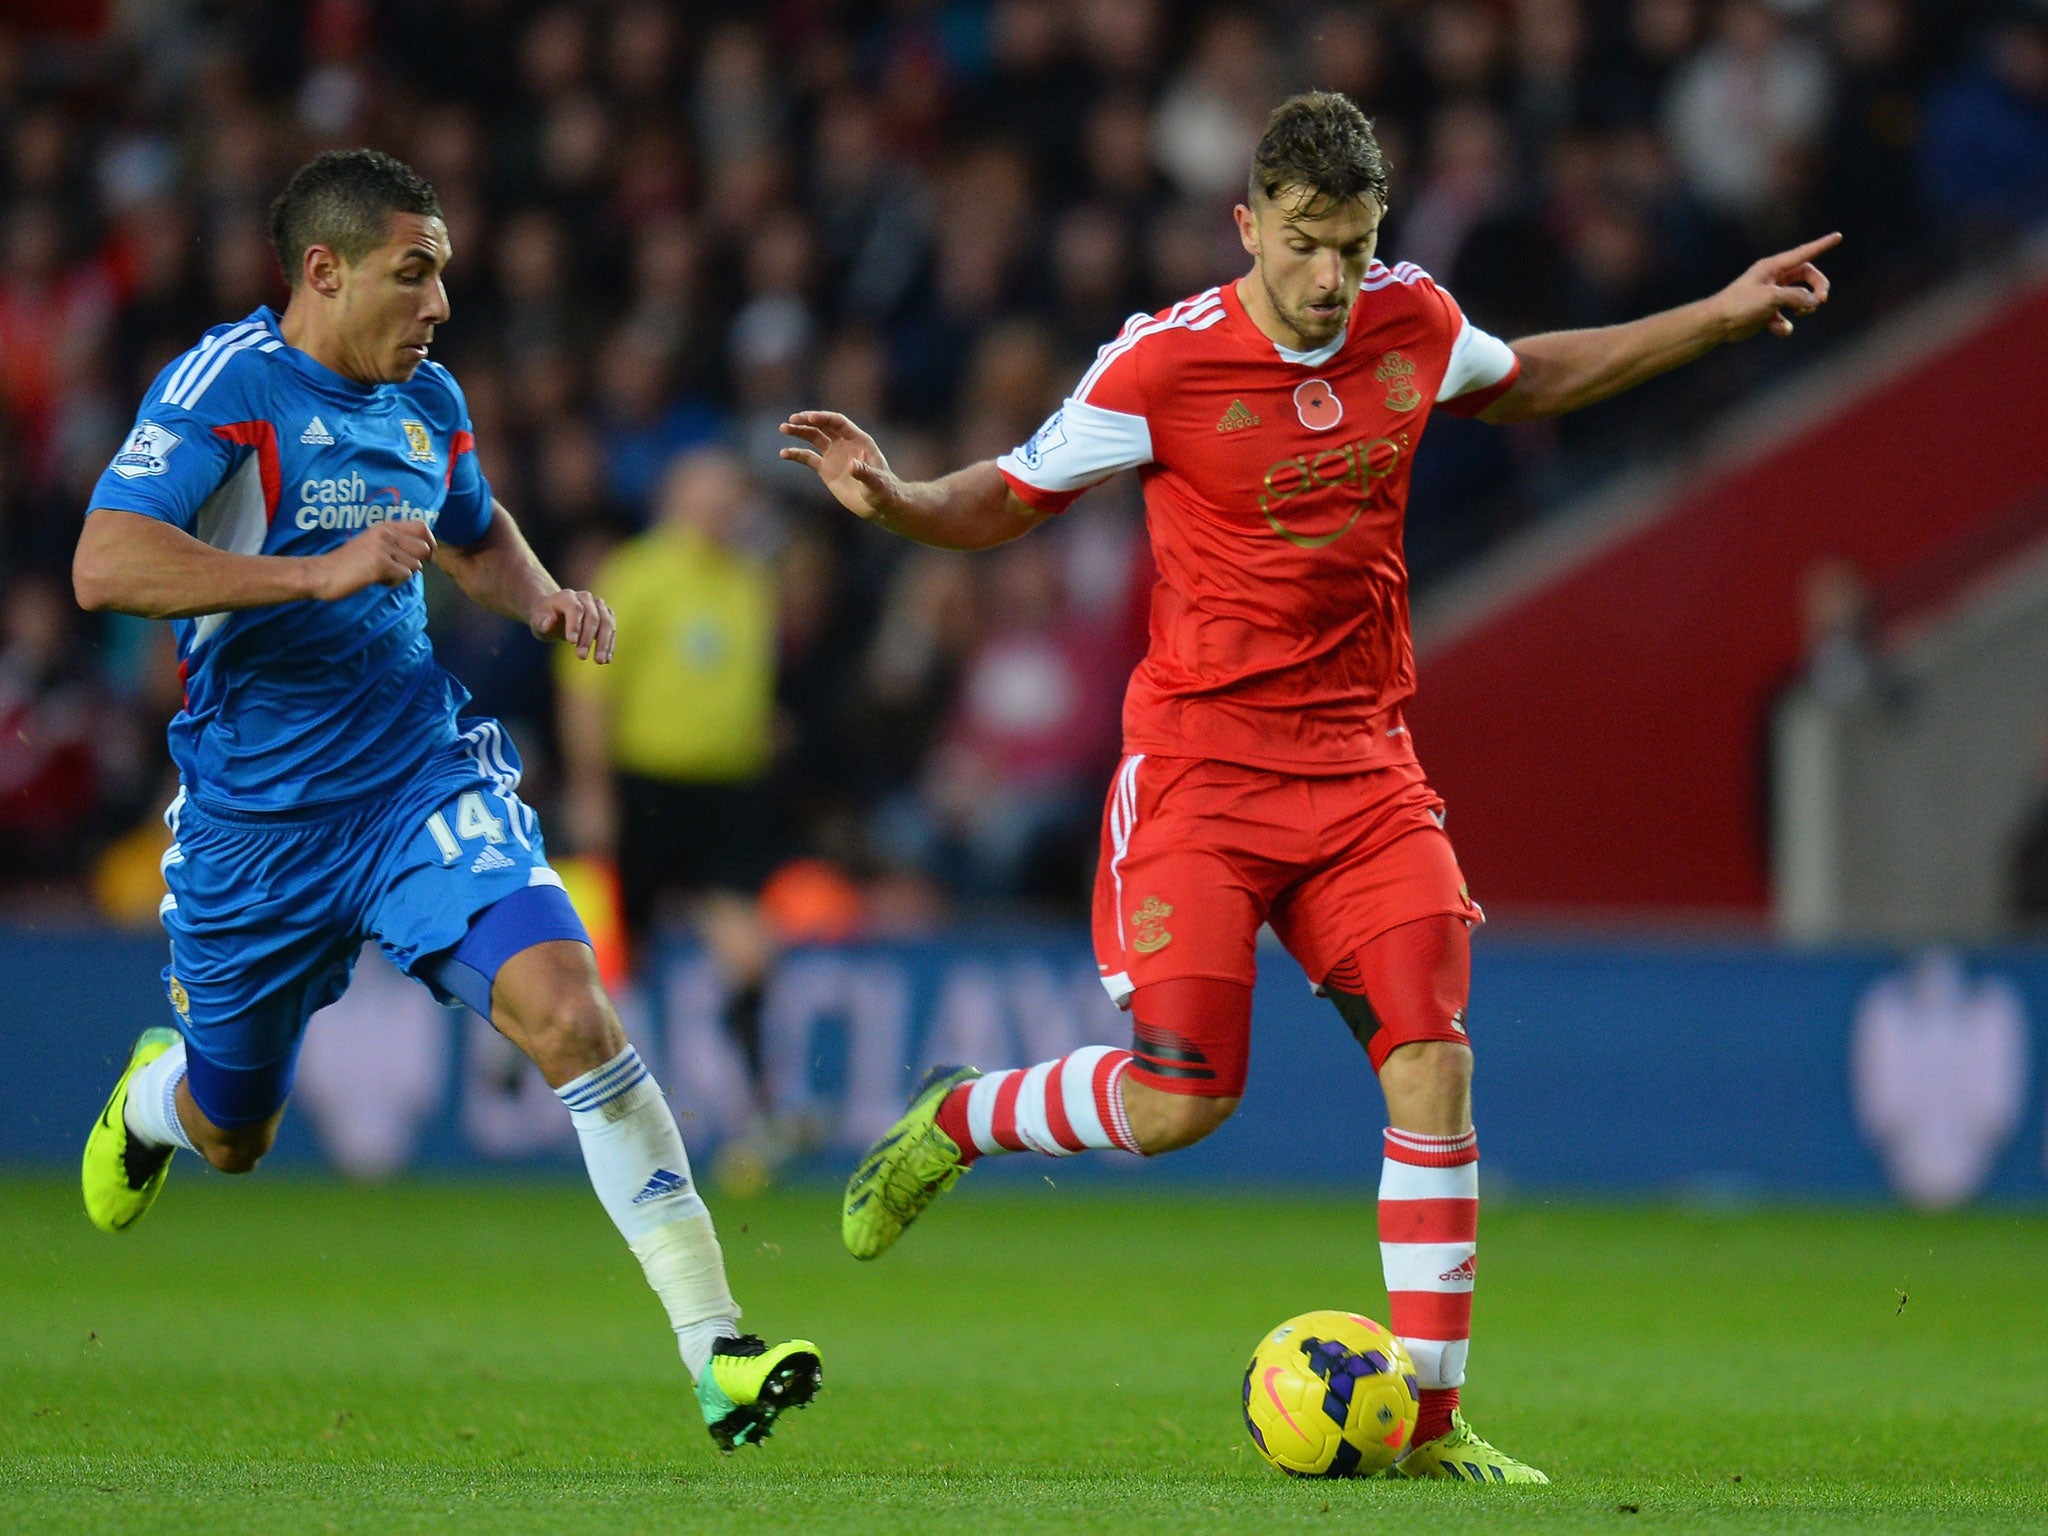 Southampton forward Jay Rodriguez feels the team can push even higher than their current third place